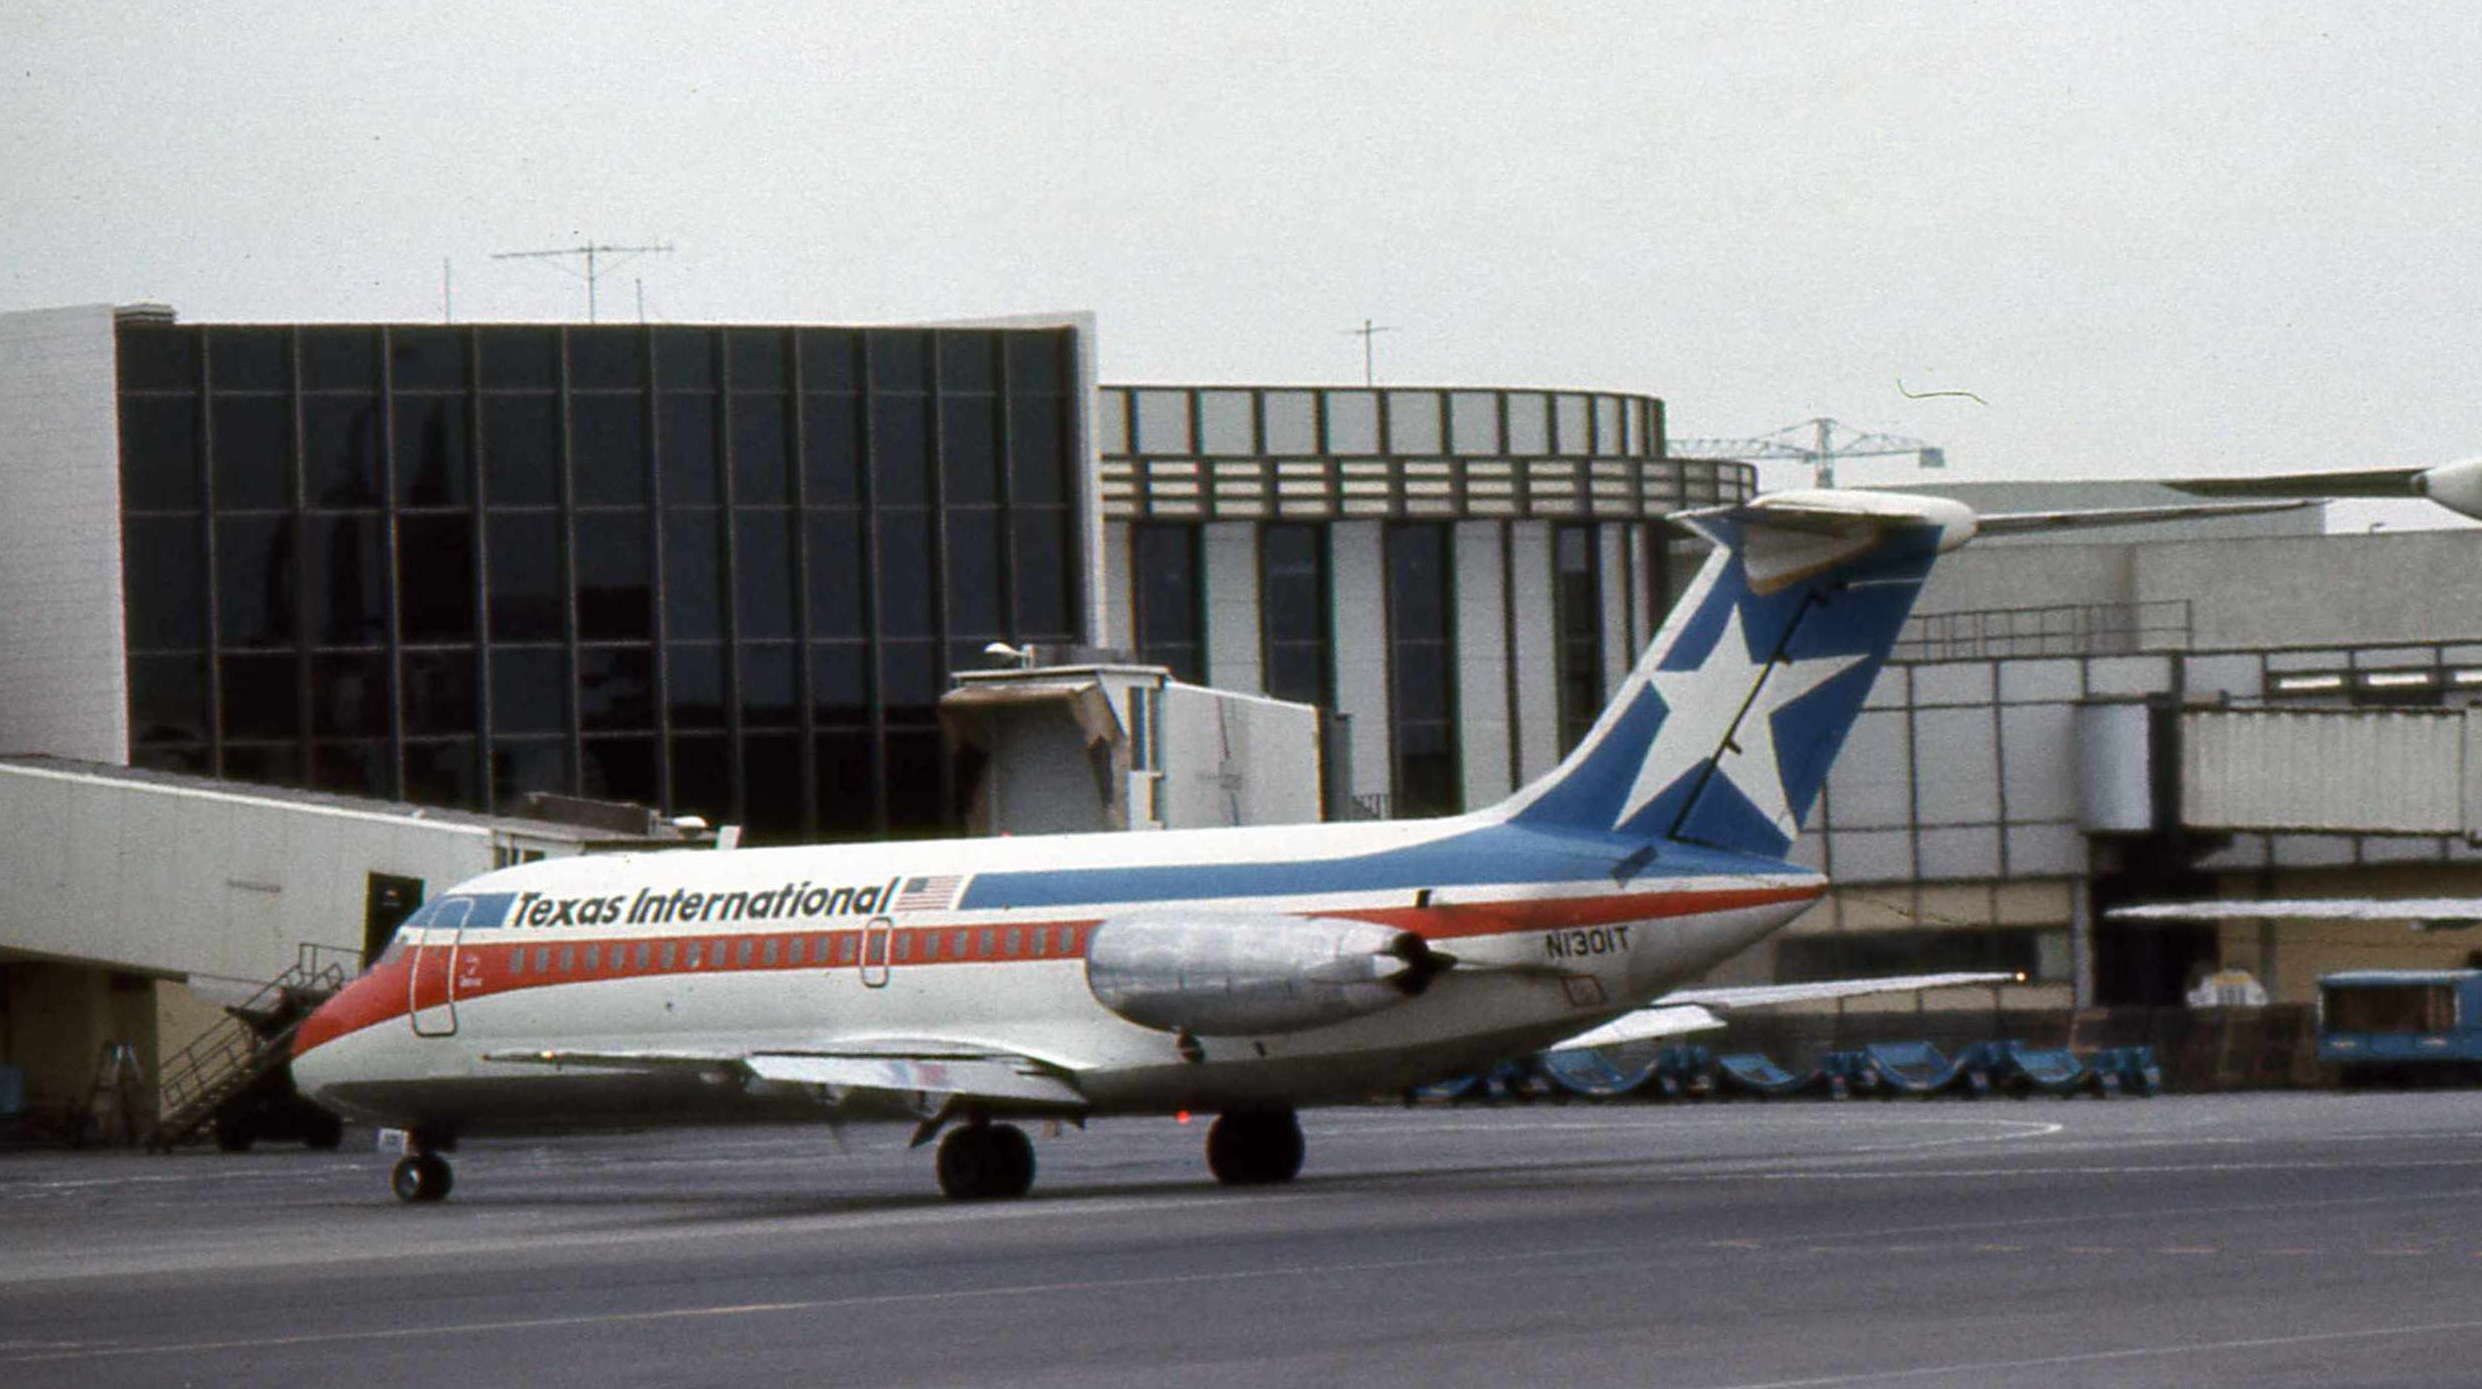 A Texas International Airlines DC-9 Parked on the apron At LAX.